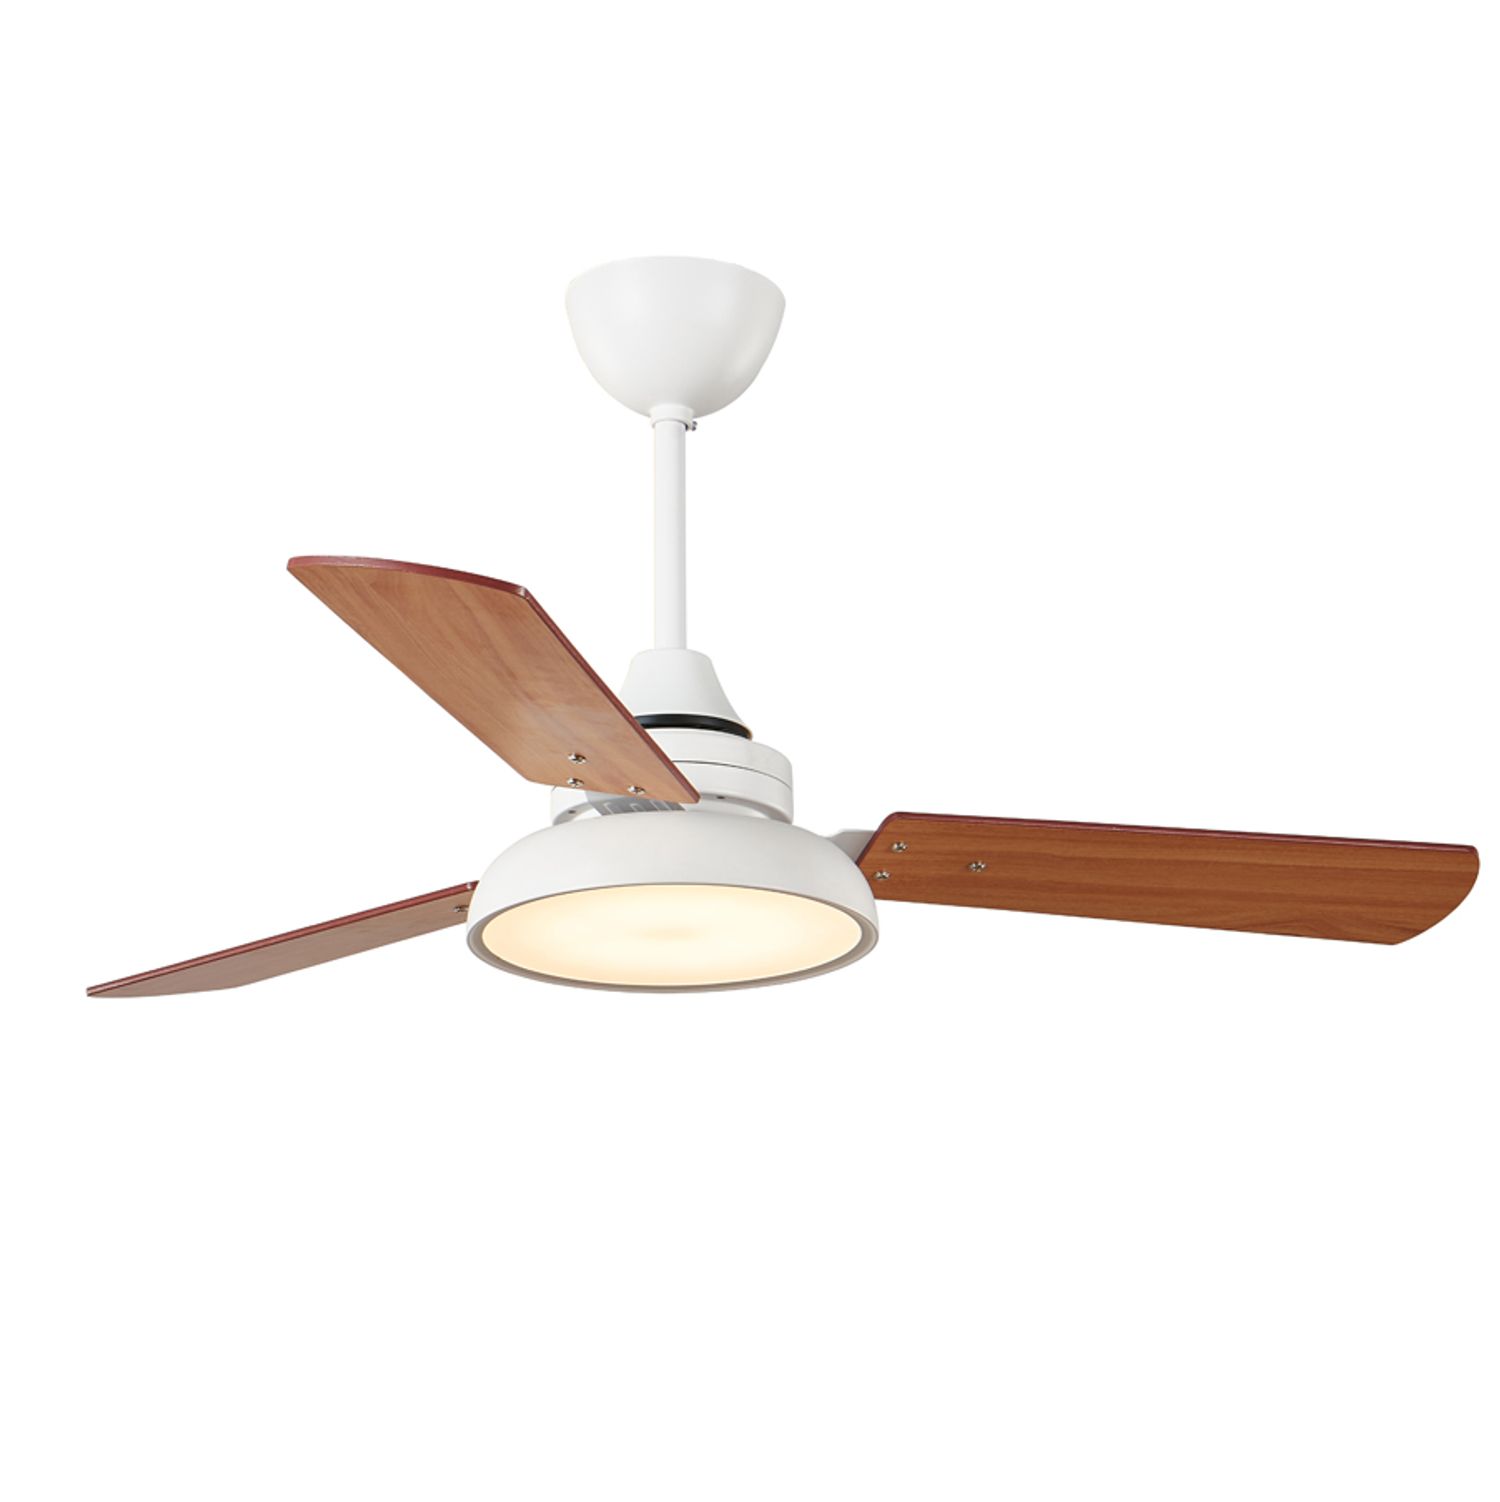 KBS 42" White and plywood blade contemporary 5 speed fan with remote and light